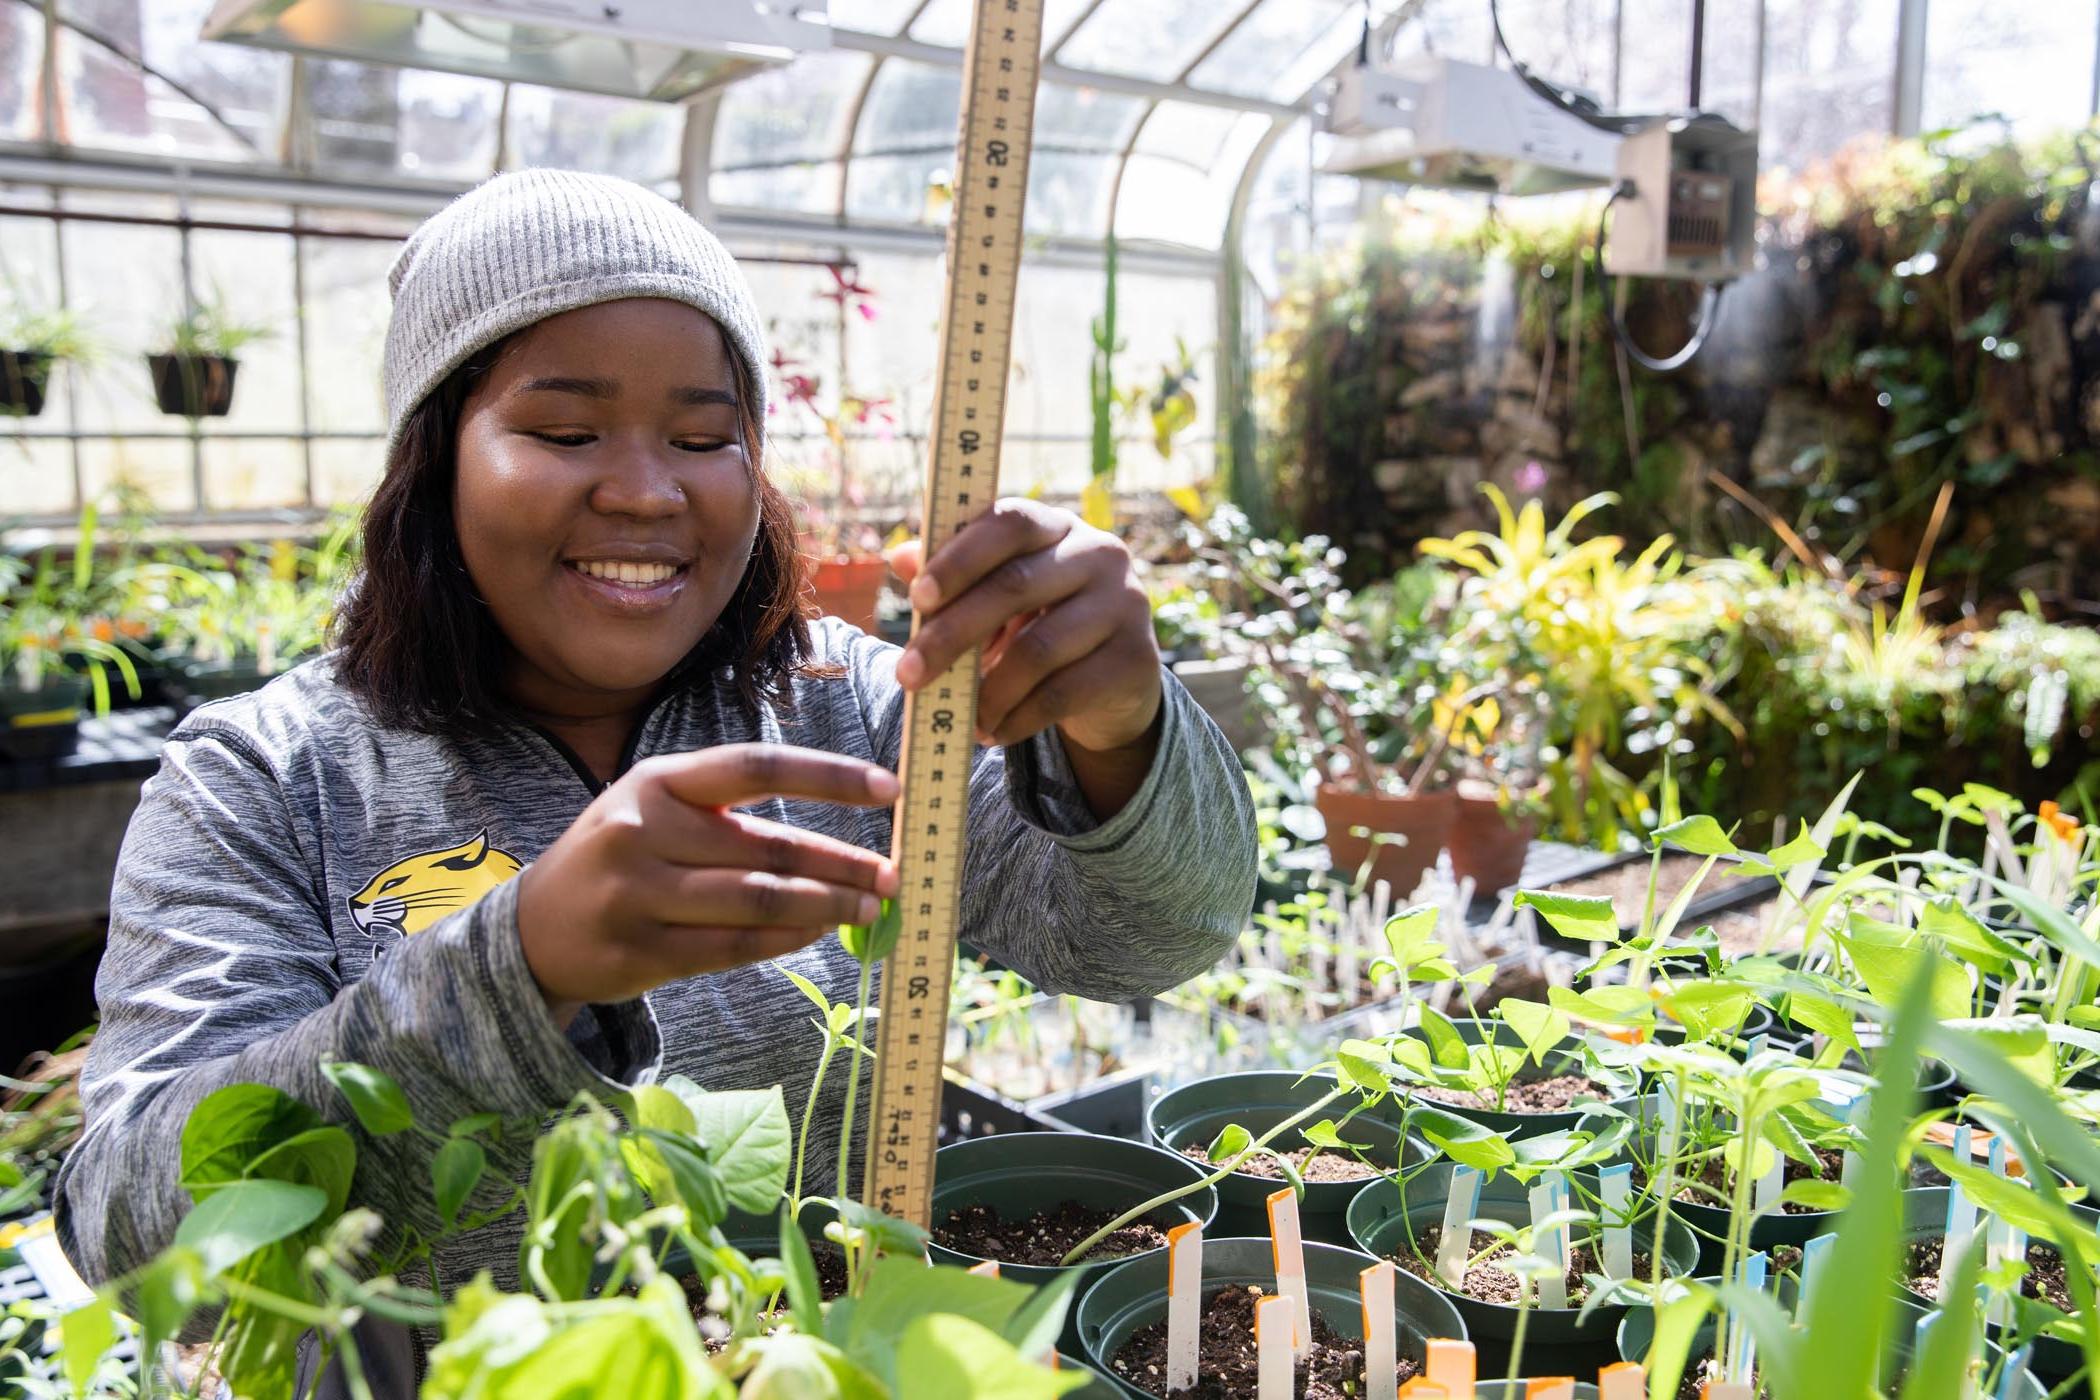 Jdody Misidor measures plant growth in the greenhouse at Martin Science Center